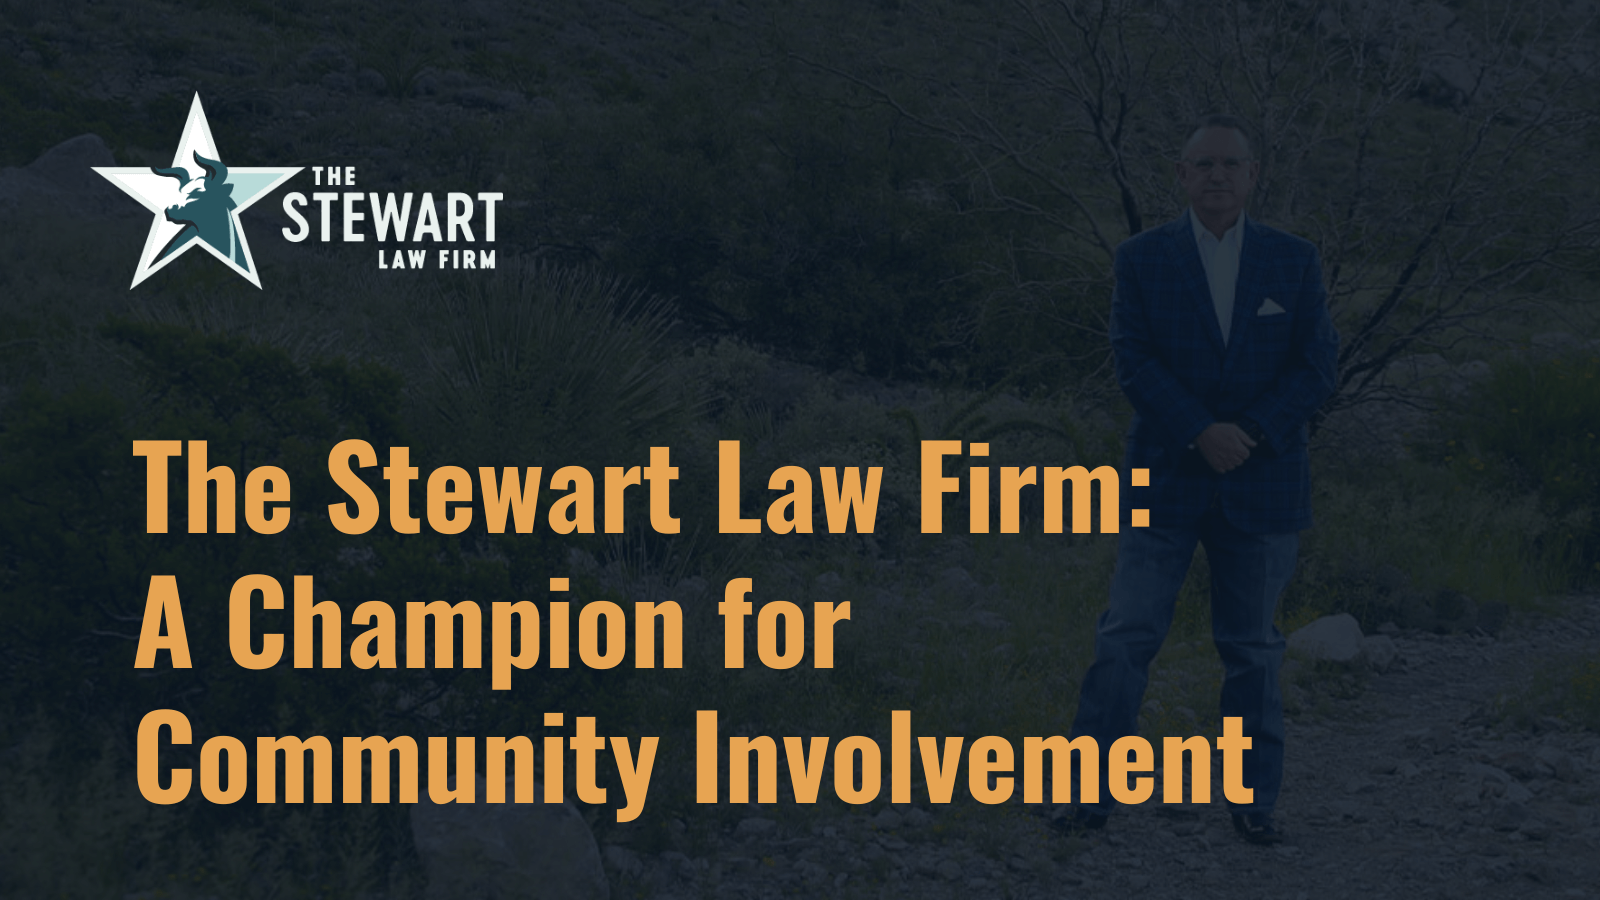 The Stewart Law Firm: A Champion for Community Involvement - the stephen stewart law firm - austin texas personal injury lawyer